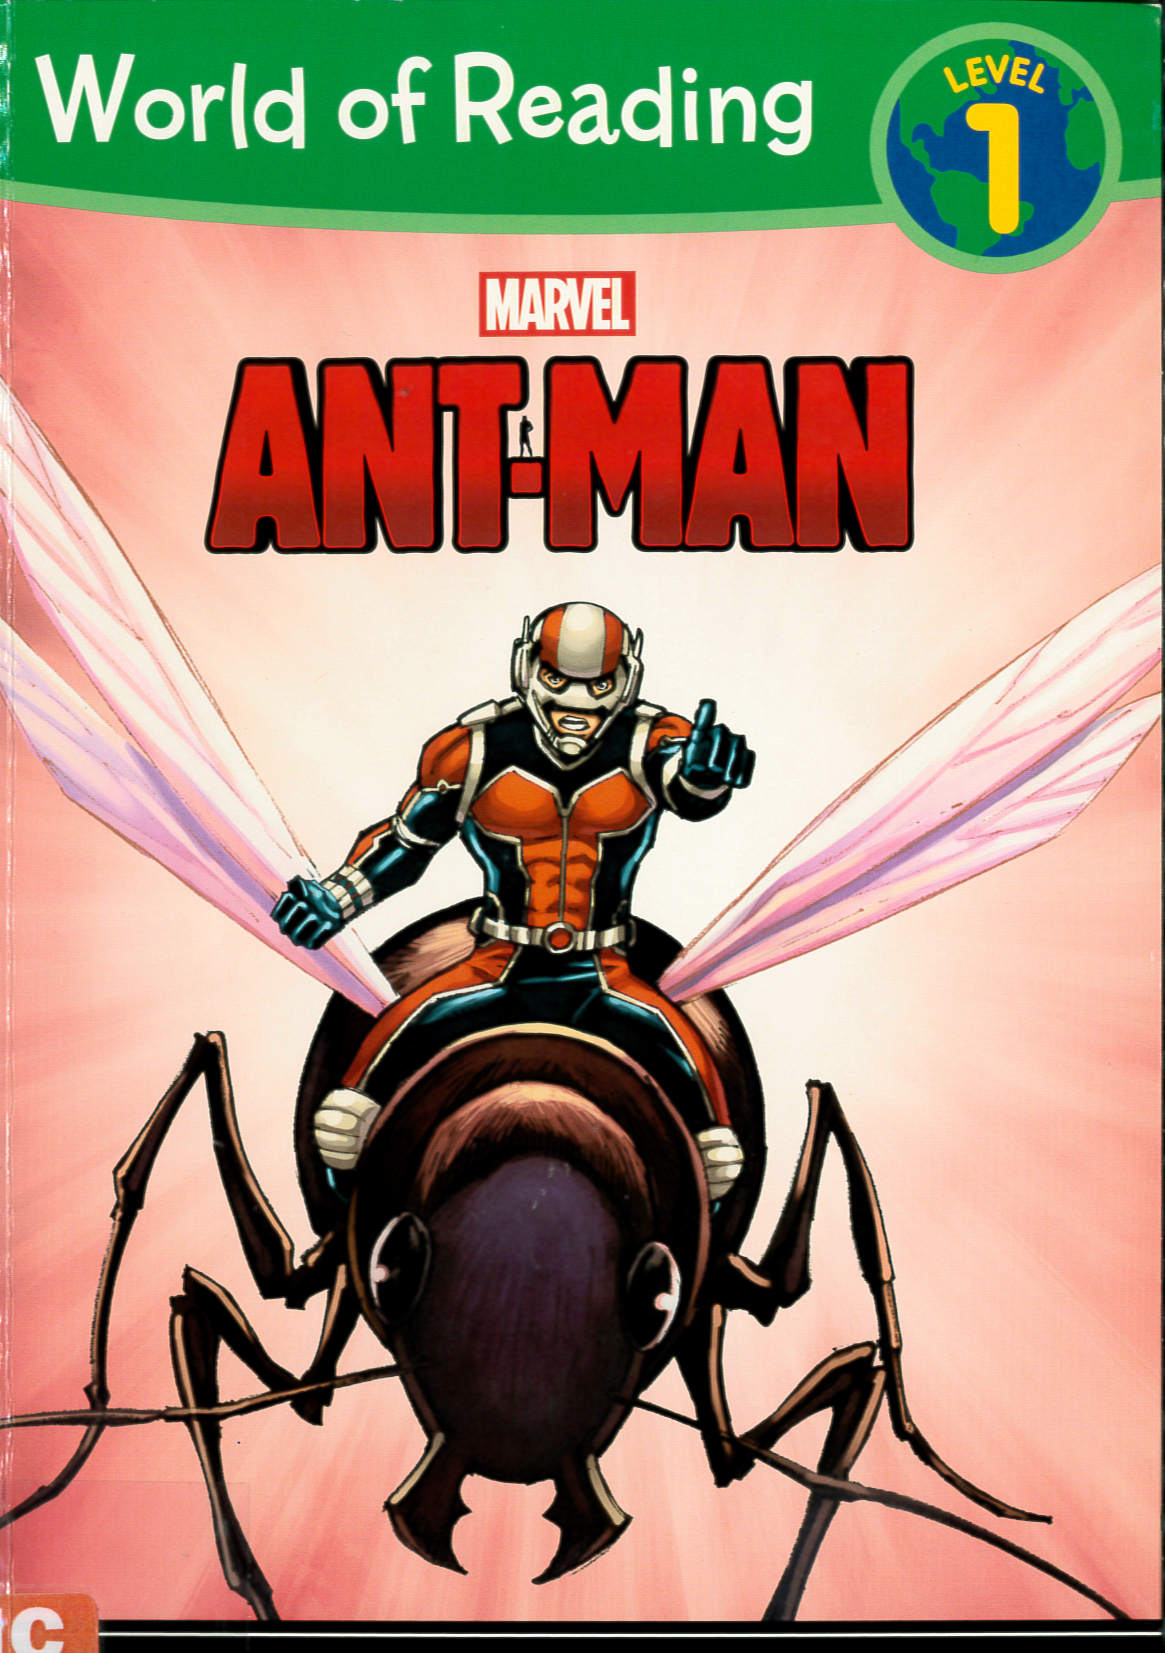 This is Ant-Man /